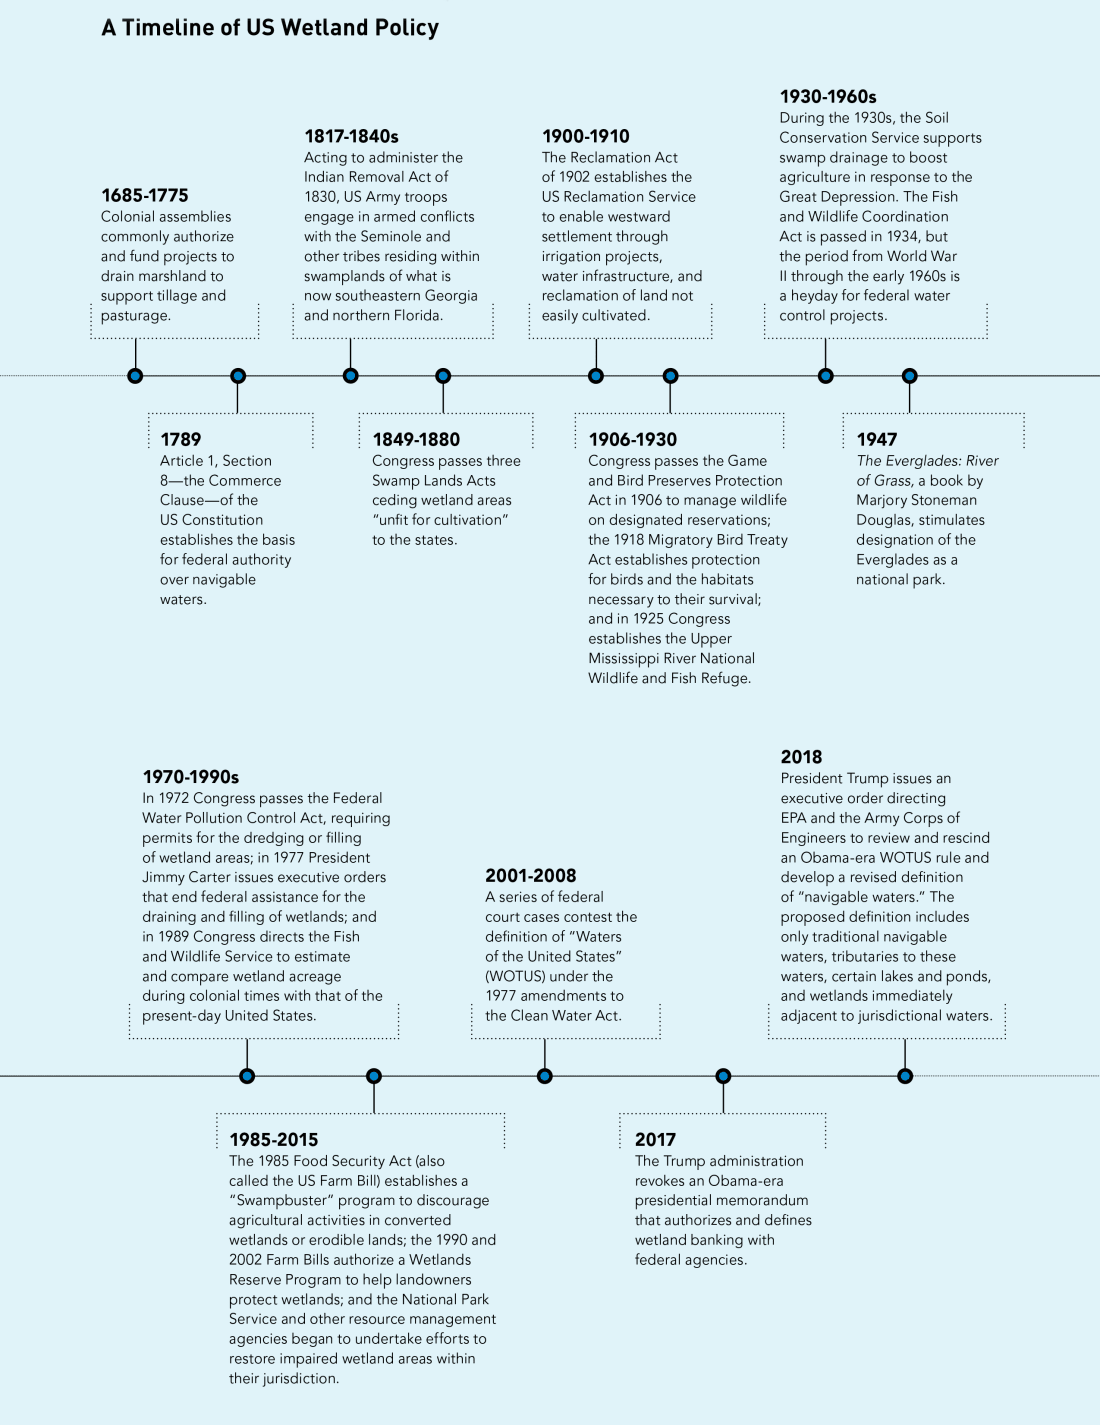 A timeline of US wetland policy